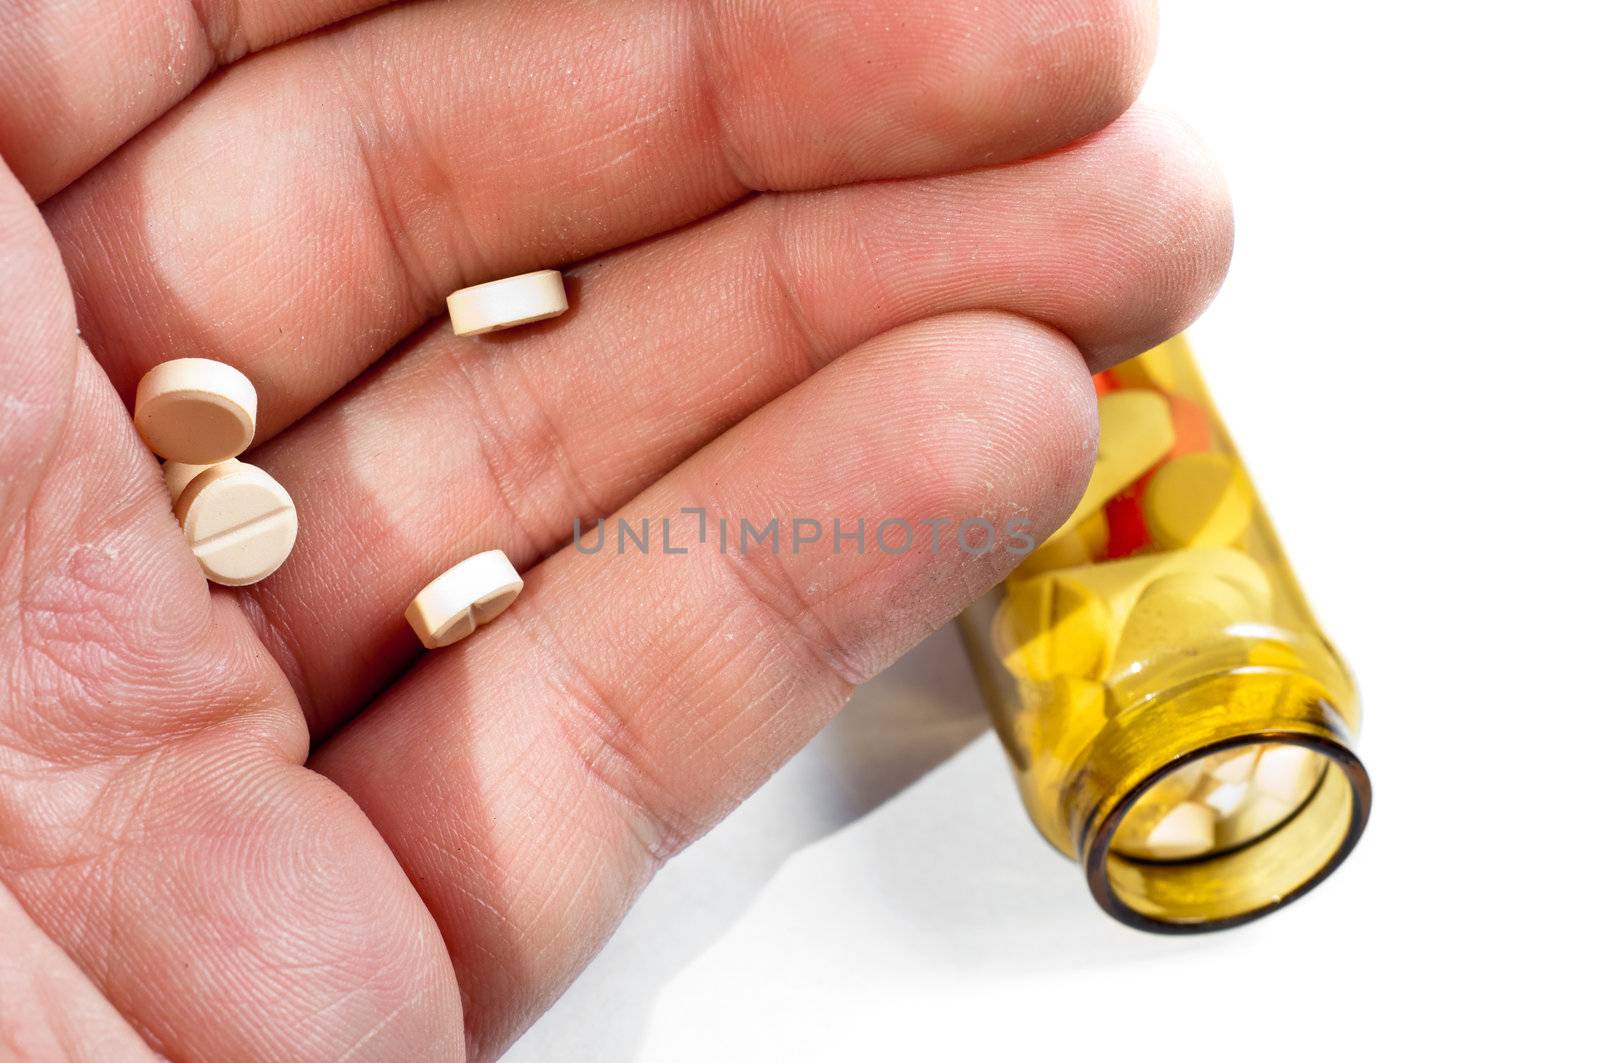 Hand of a man holding pills with medicine on background